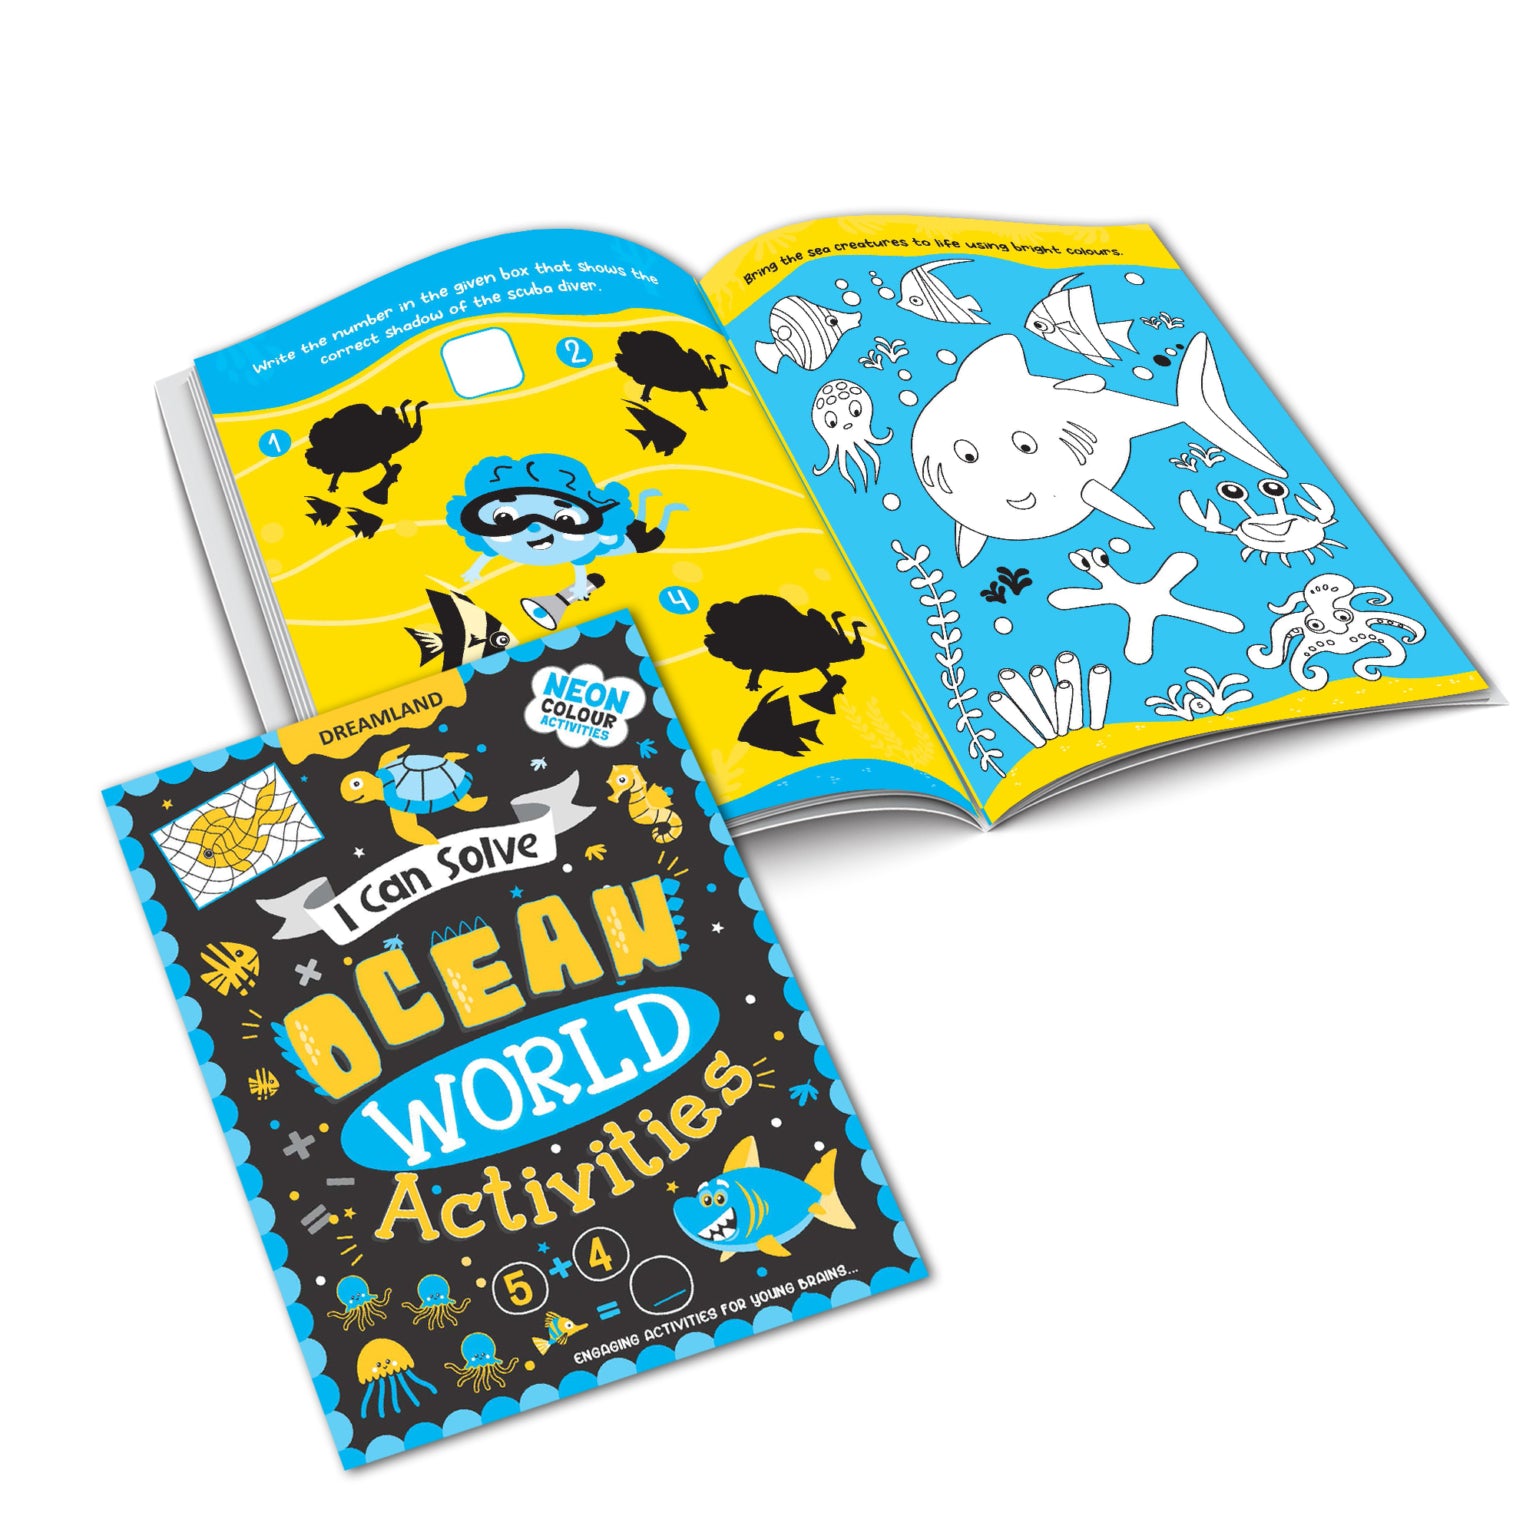 Ocean World Activities – I Can Solve Activity Book for Kids Age 4- 8 Y